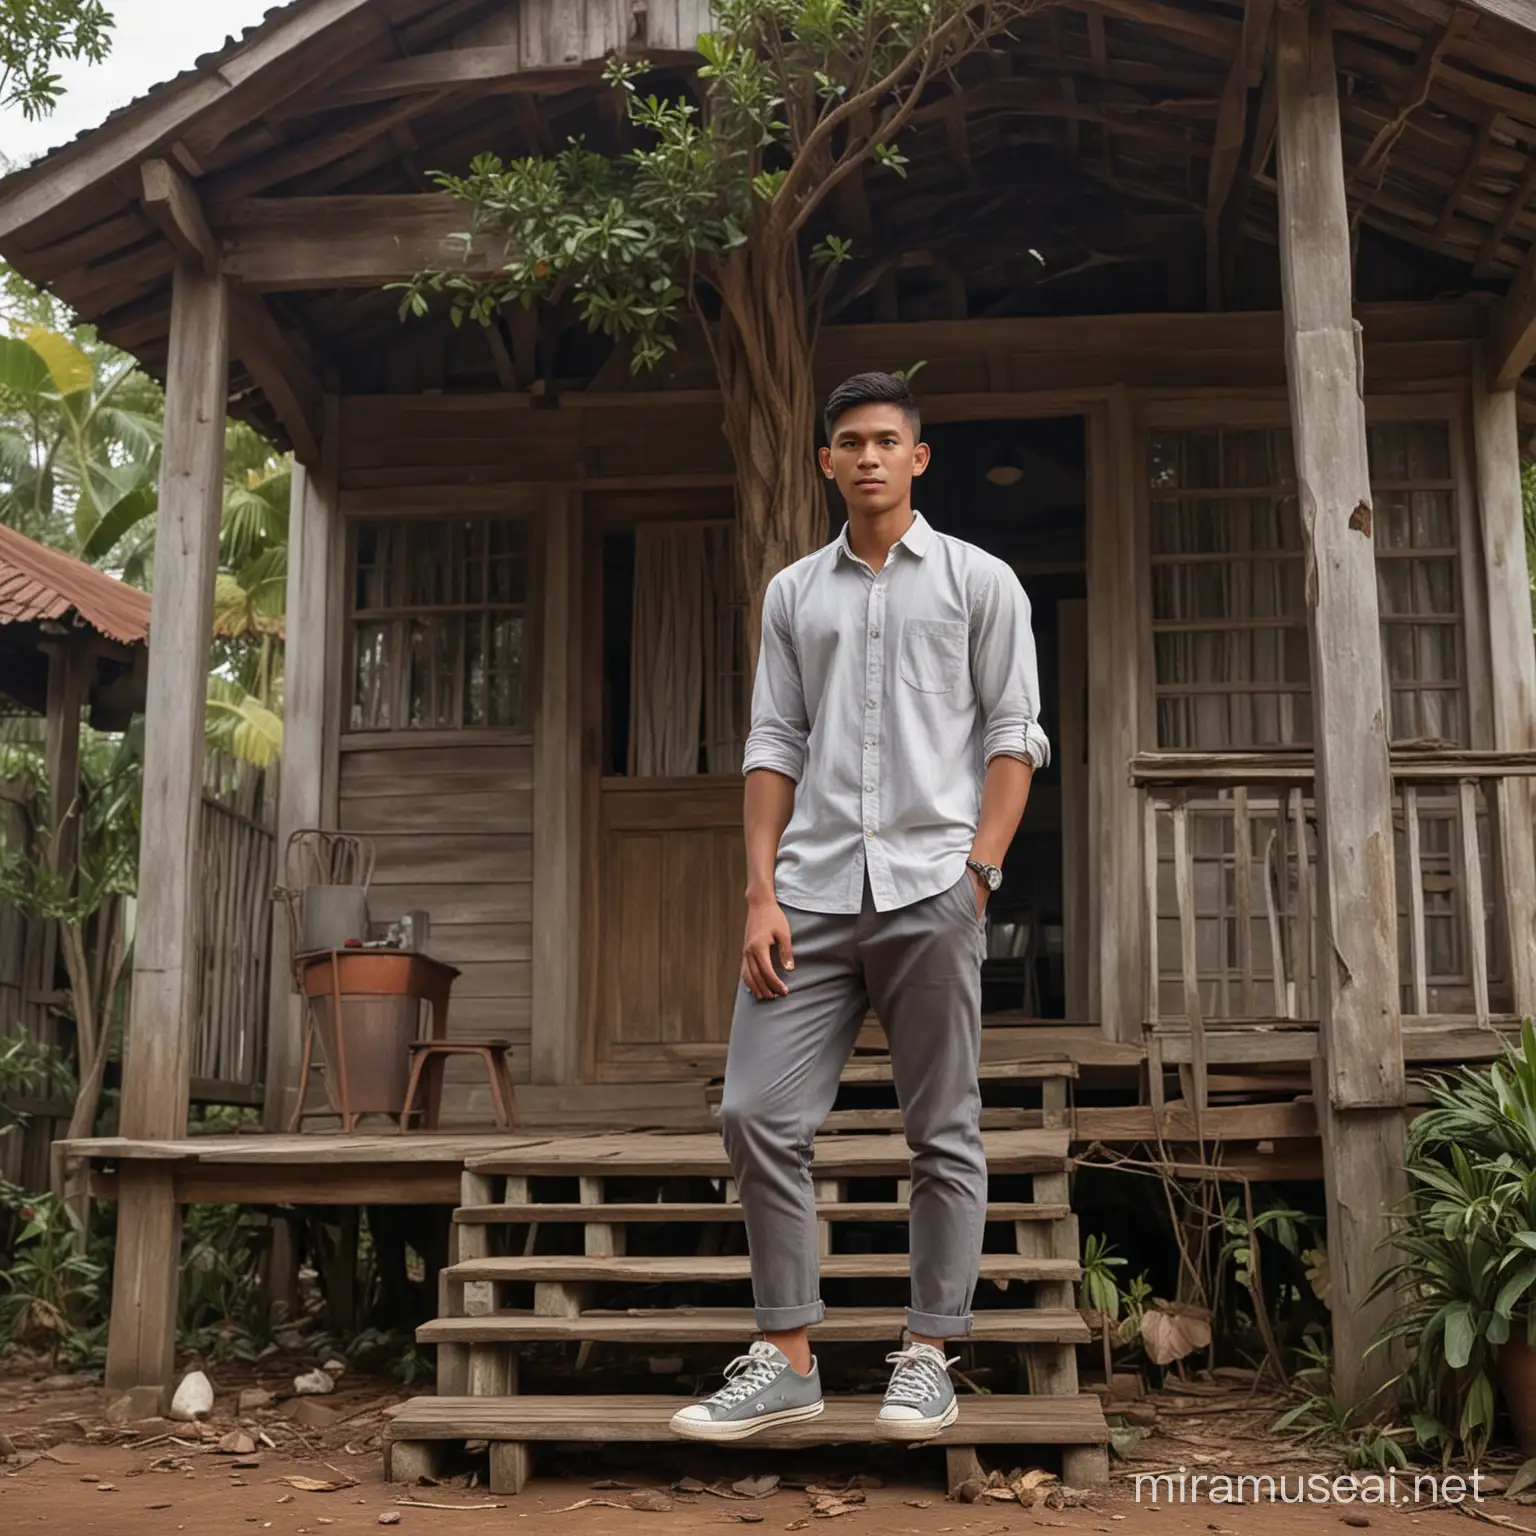 Handsome Indonesian Man in Village Setting with Trophy and Banyan Tree